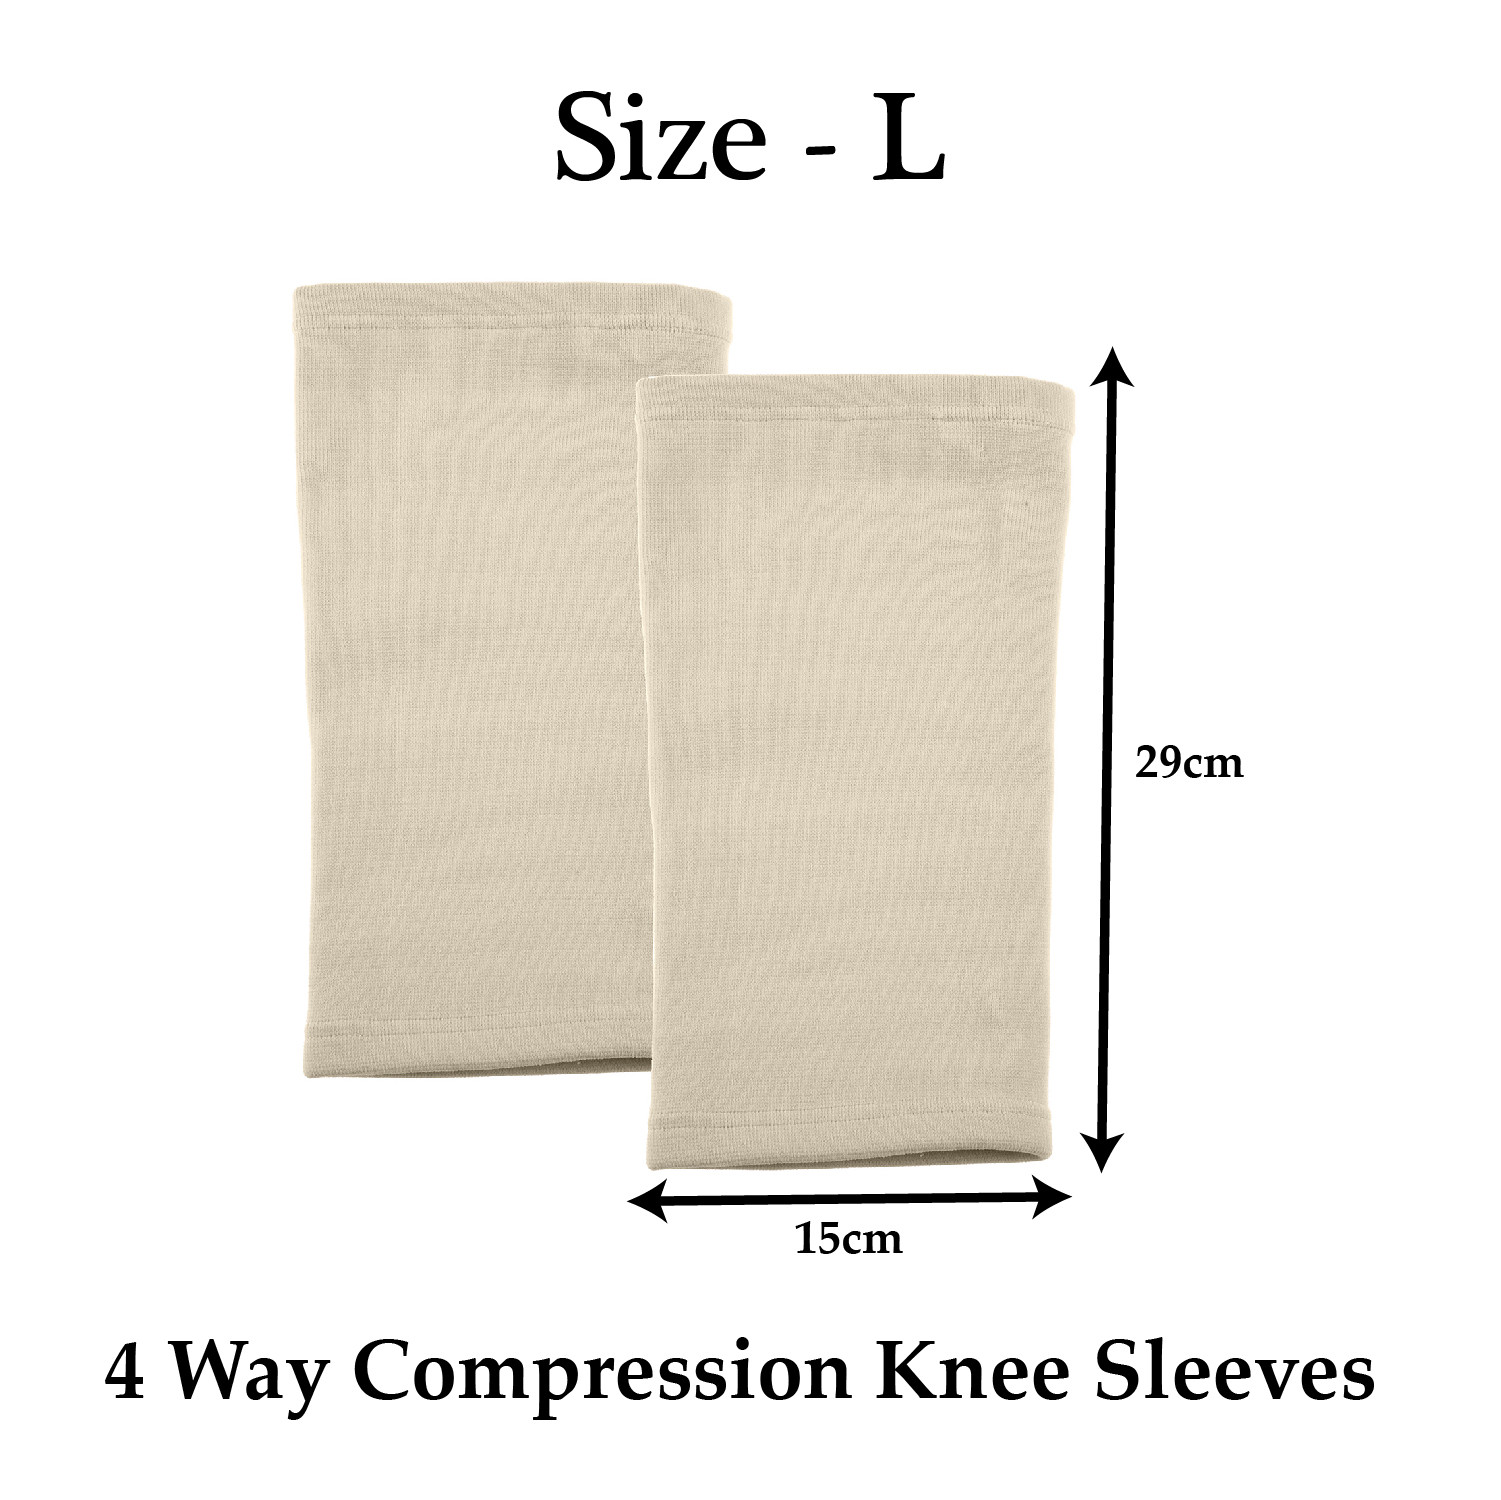 Kuber Industries Knee Cap | Cotton 4 Way Compression Knee Sleeves |Sleeves For Joint Pain | Sleeves For Arthritis Relief | Unisex Knee Wraps | Knee Bands |Size-L|1 Pair|Cream